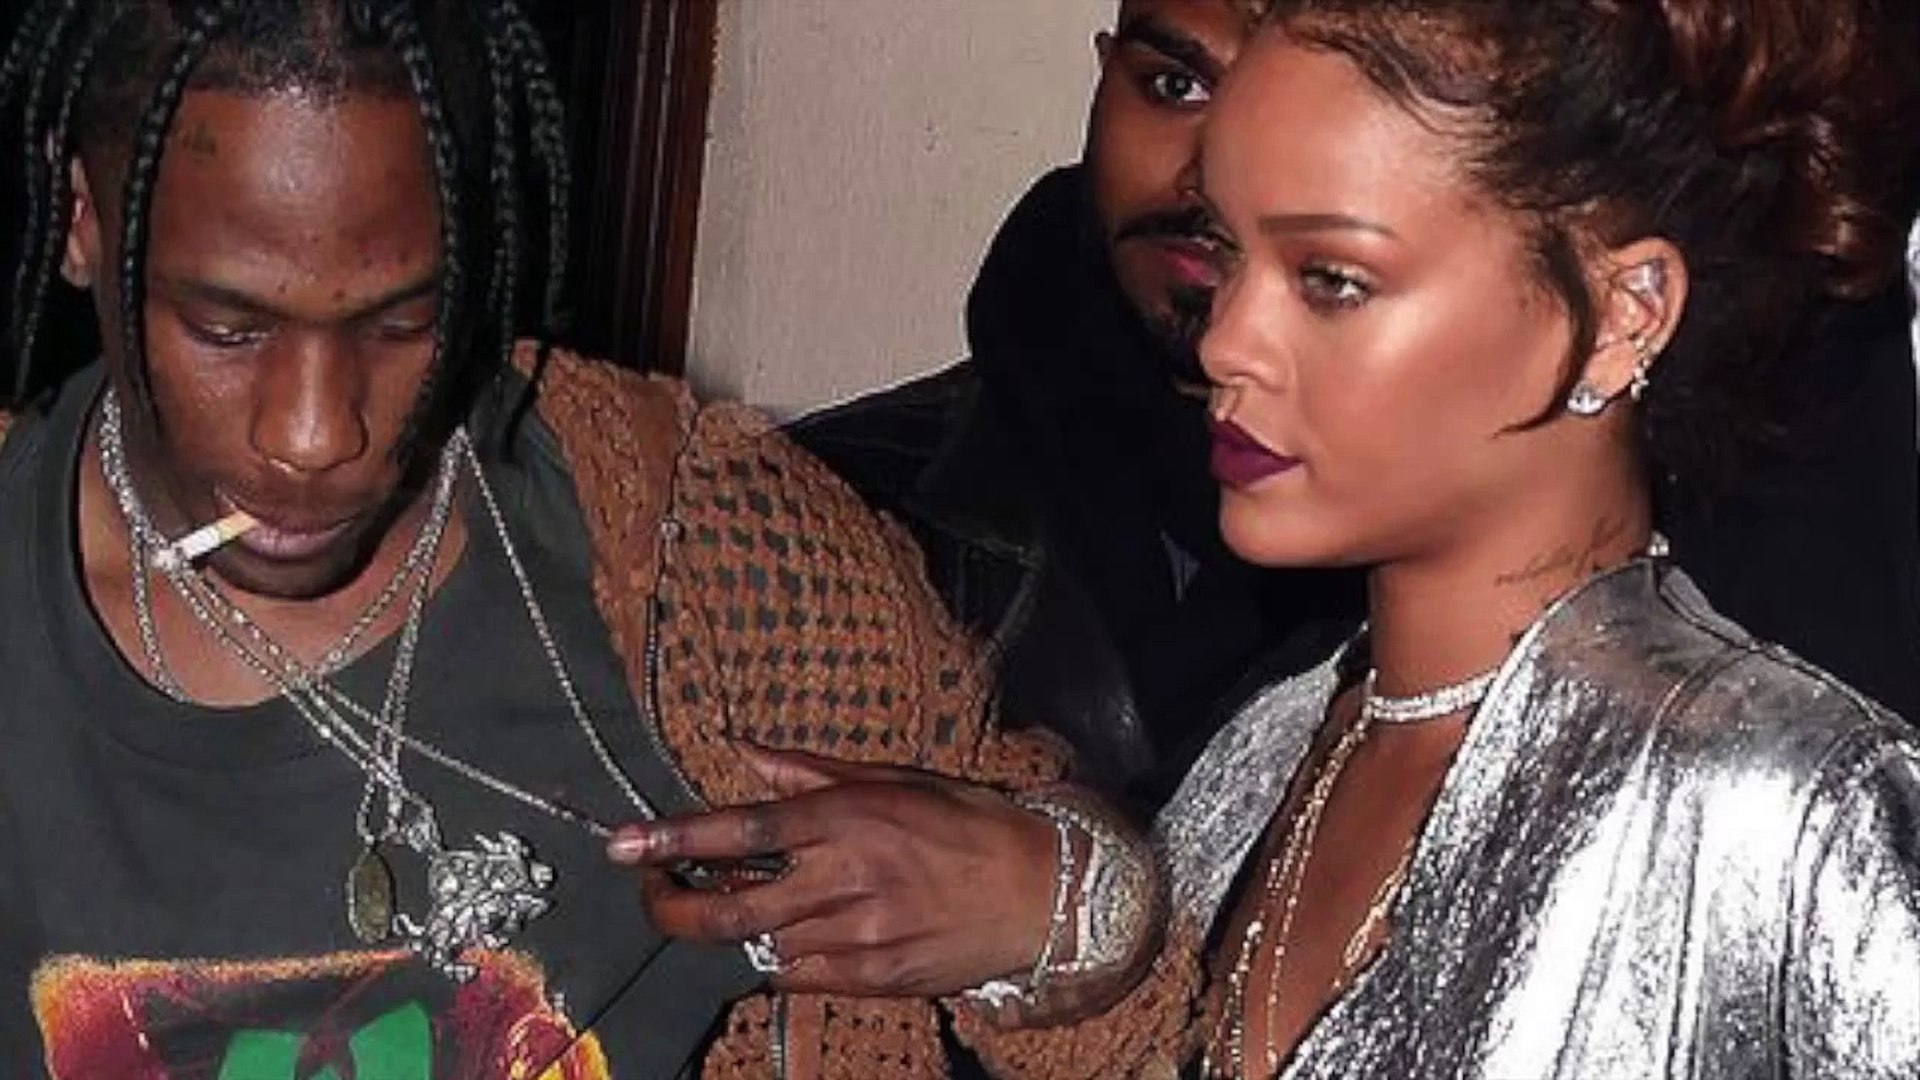 Rihanna and Travis Scott 'party at Paris nightclub' as singer glitters in silver coat